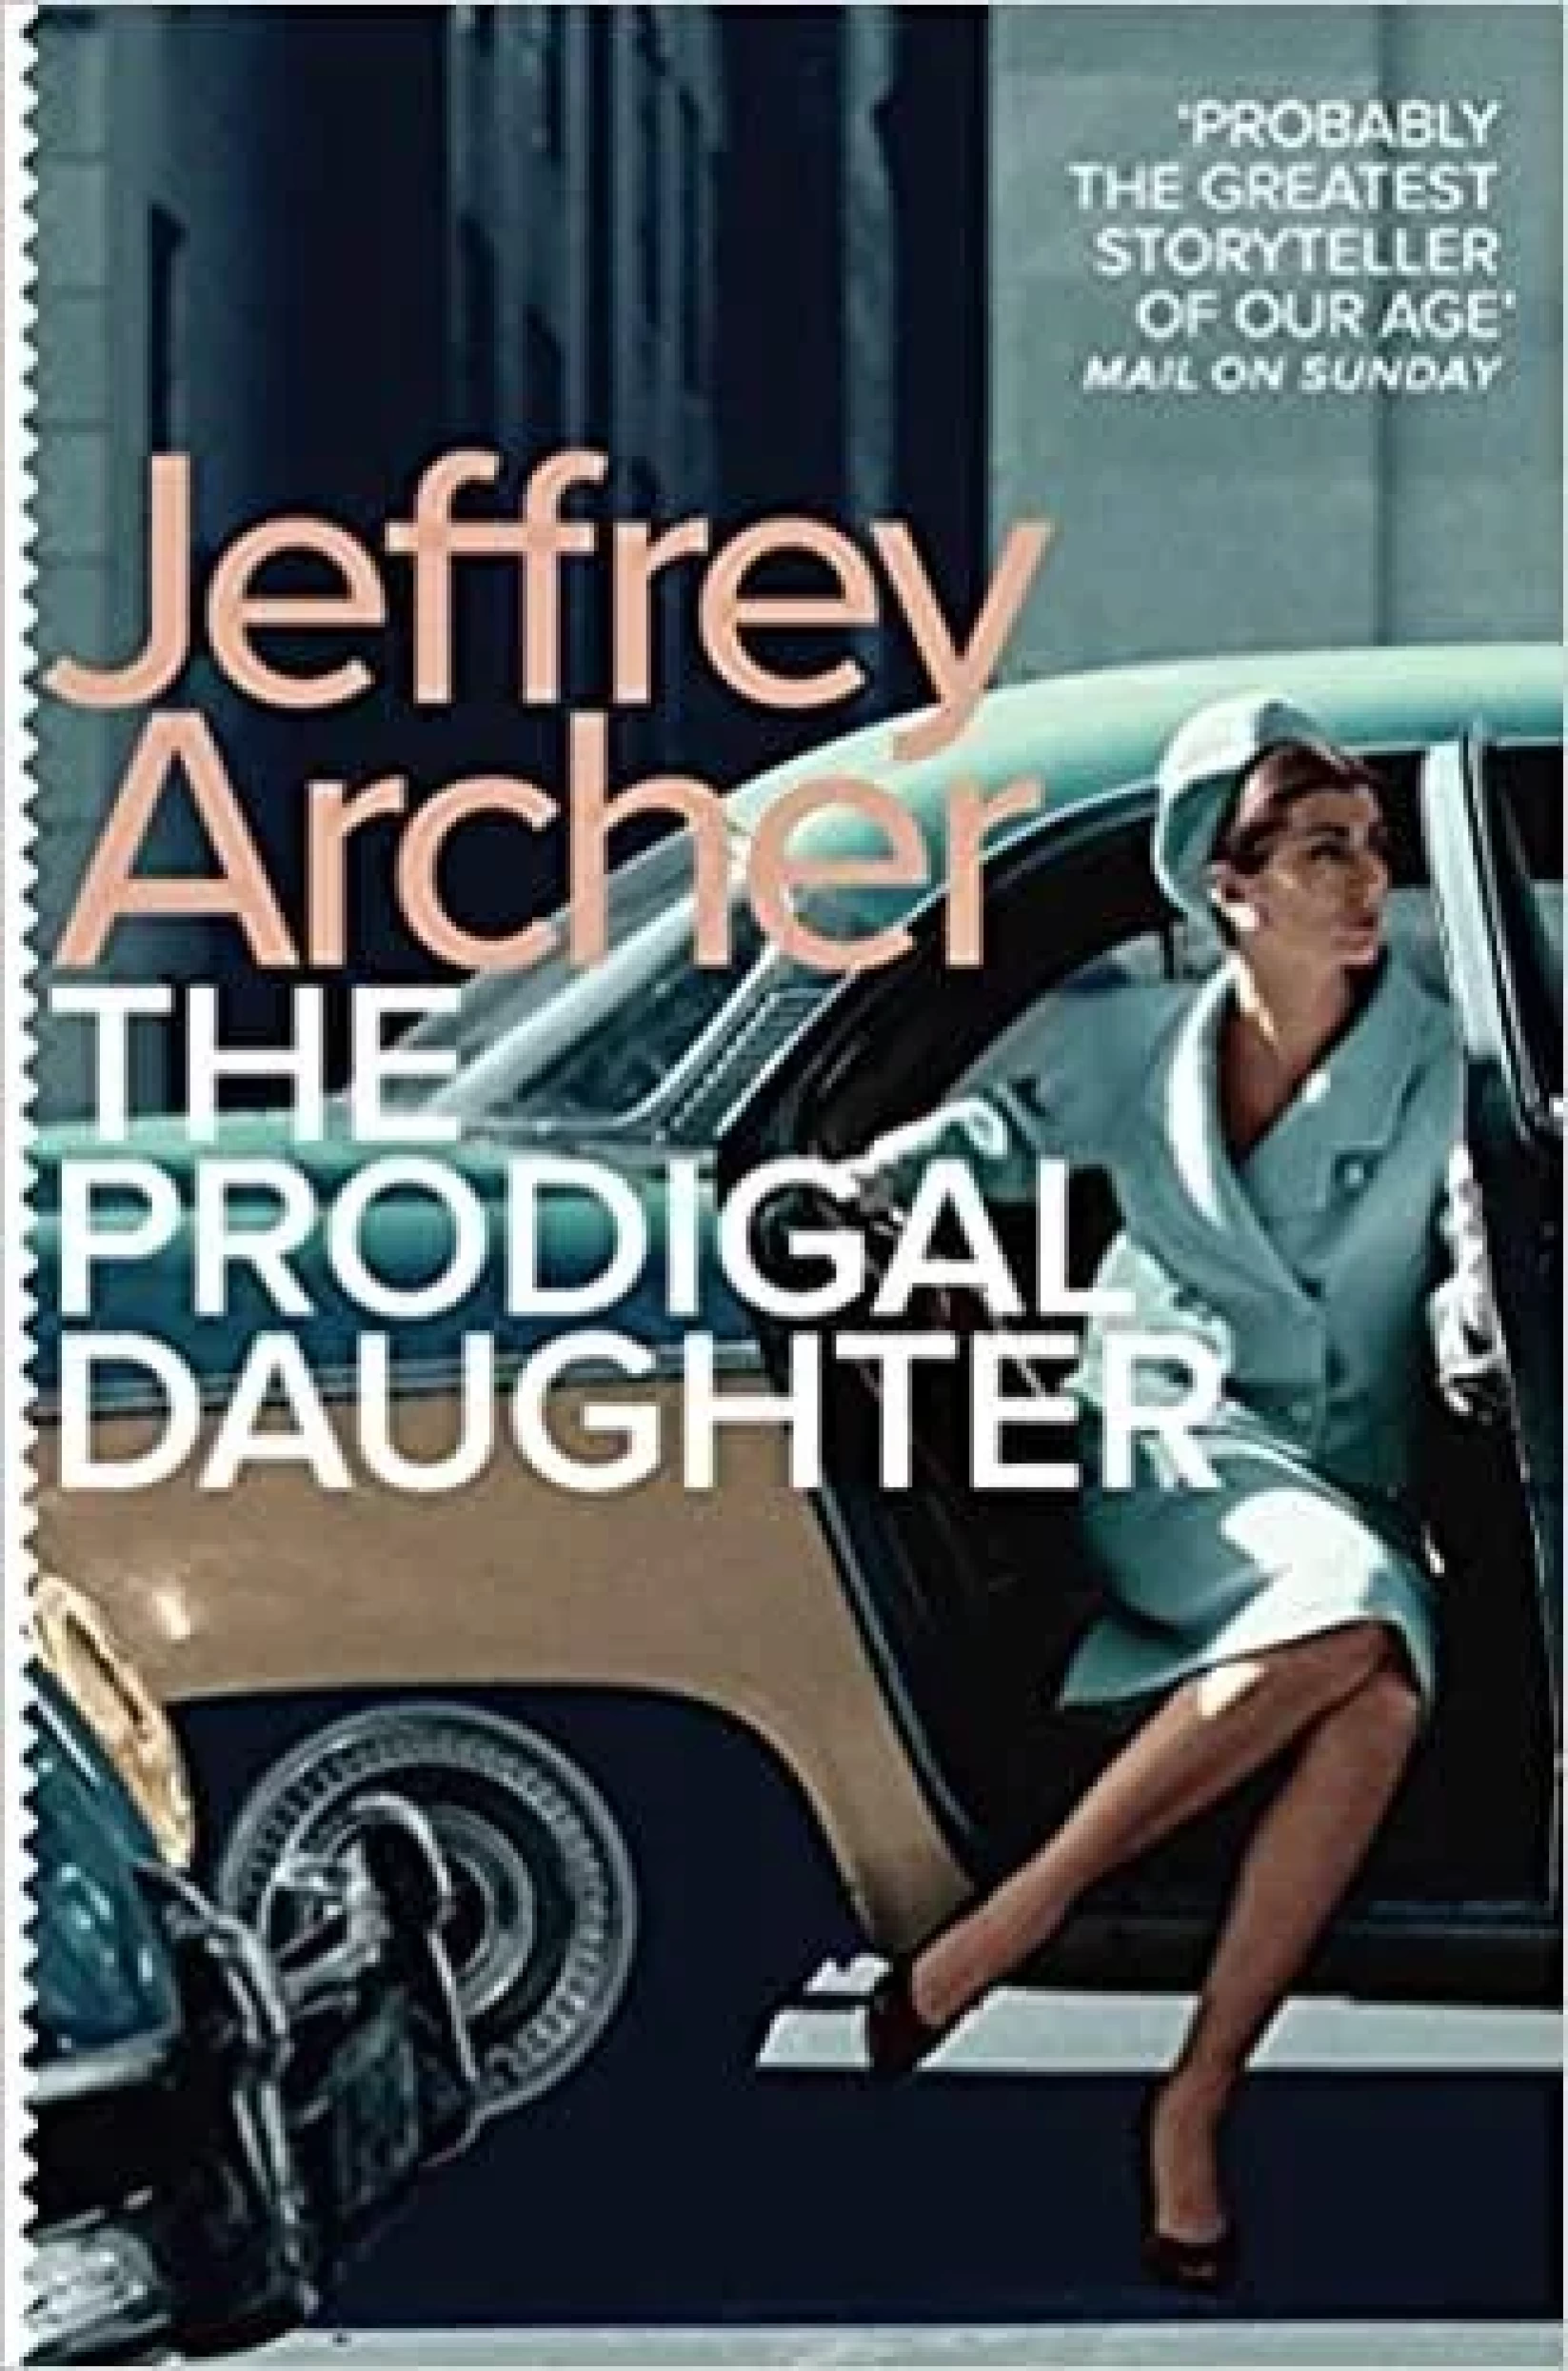 The Prodigal Daughter by JEFFREY ARCHER